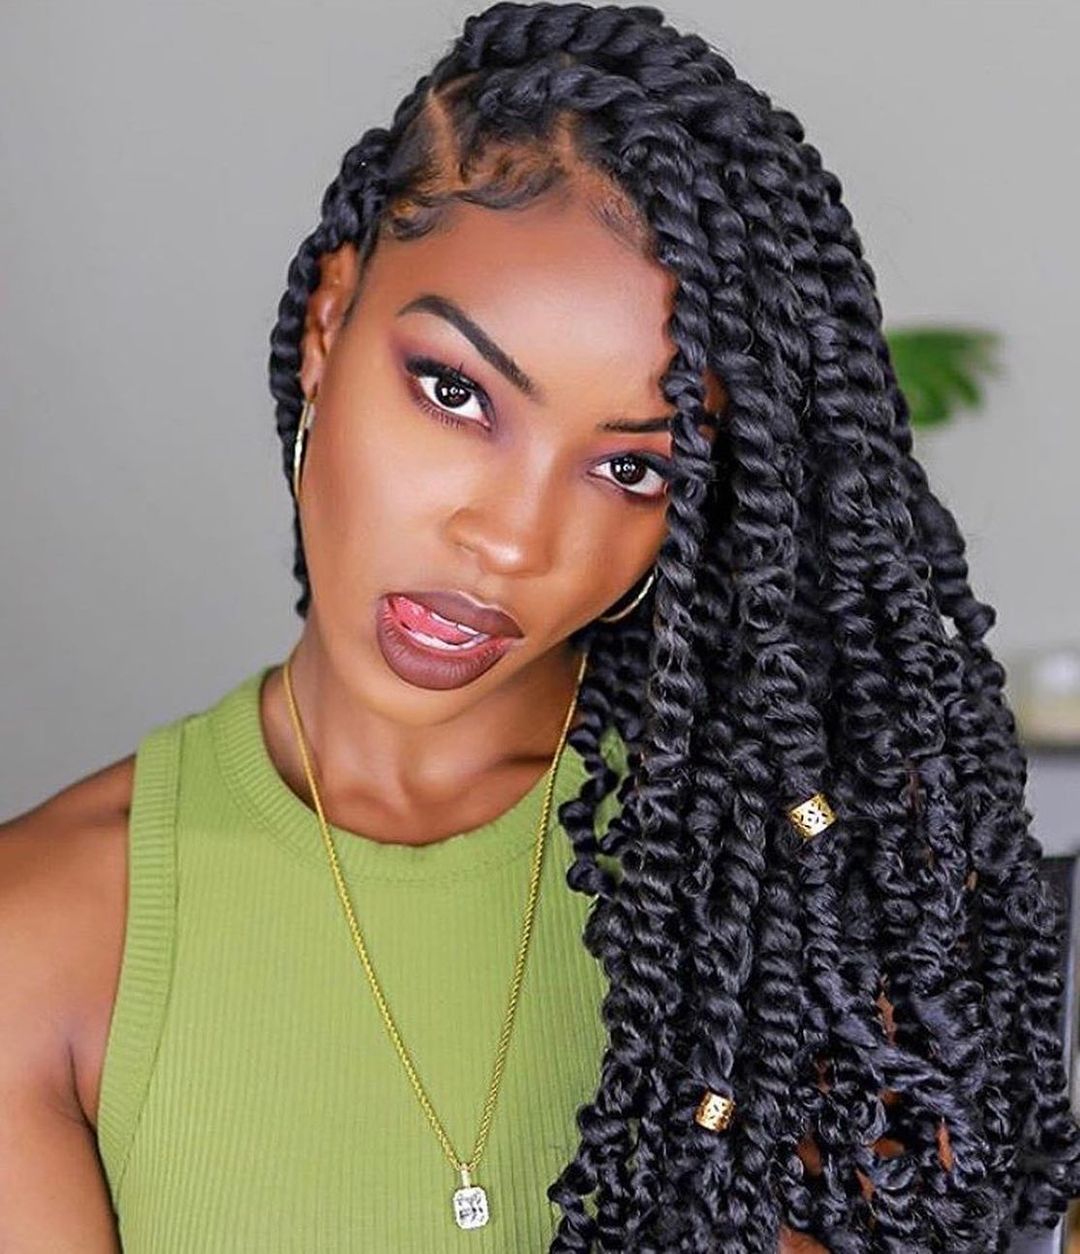 25 Twist hairstyles 2021 pictures for Round Face